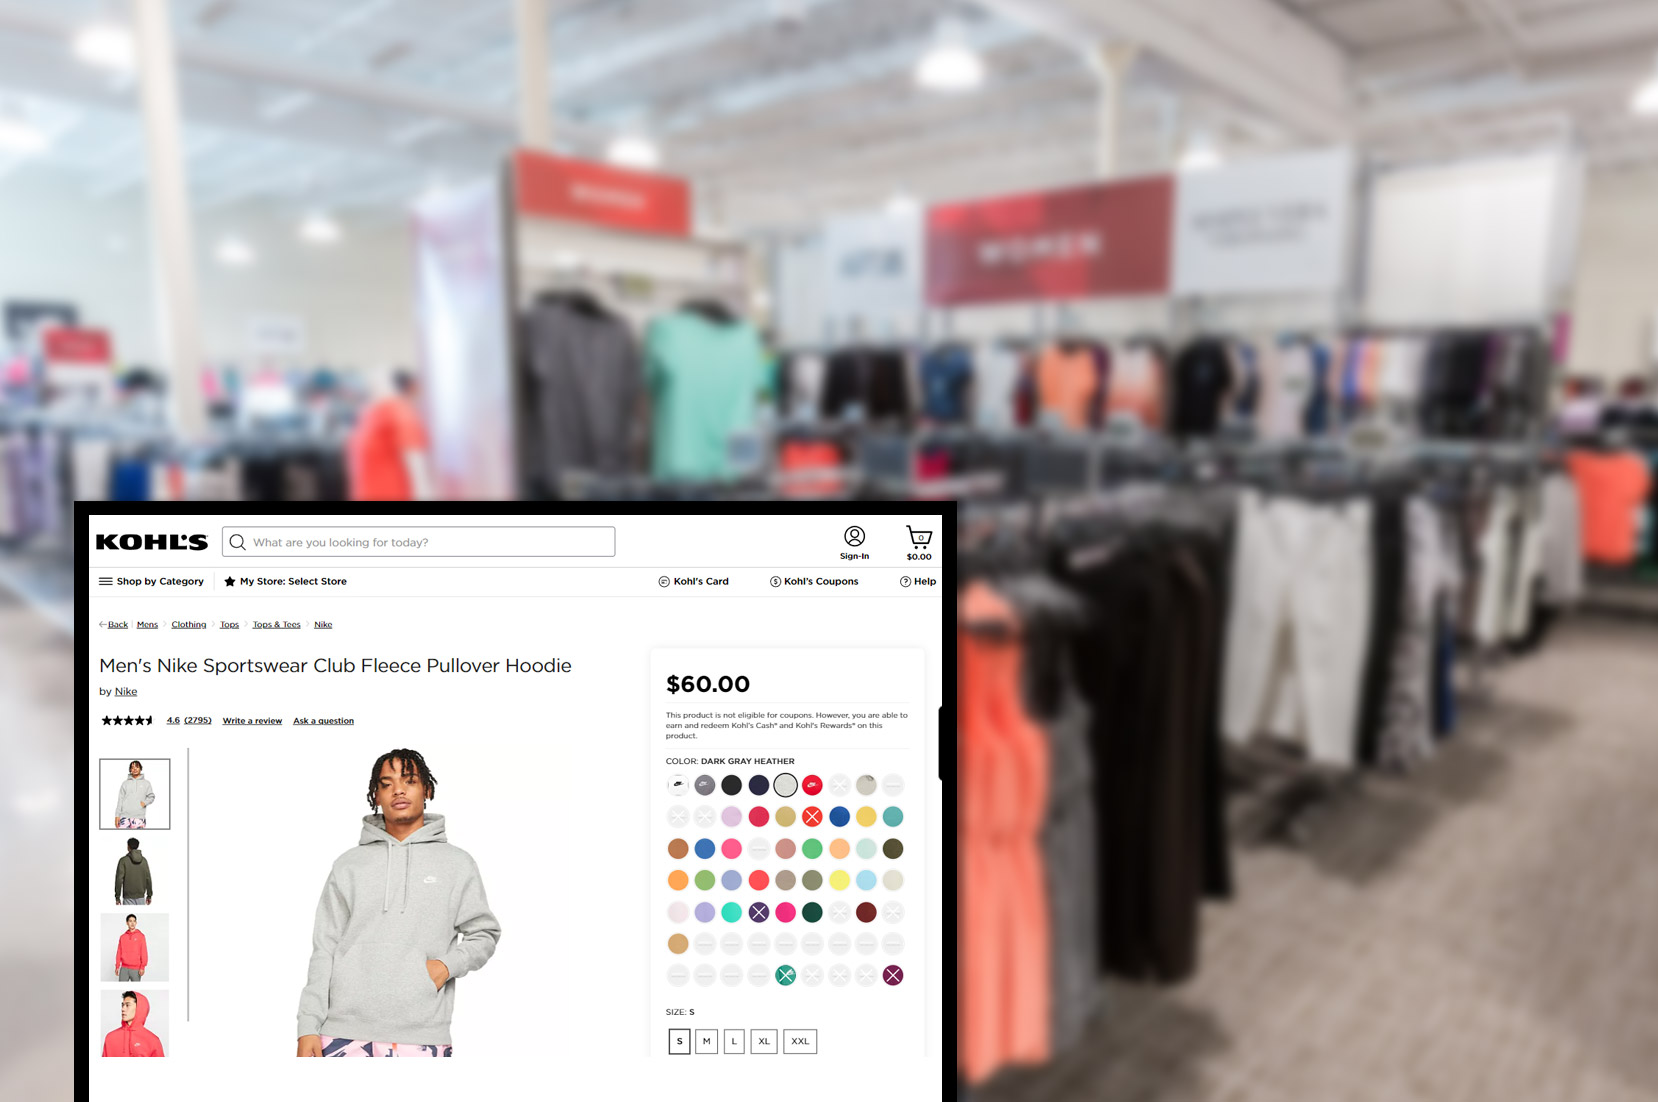 kohls-comproduct-pricing-information-and-image-scraping-services